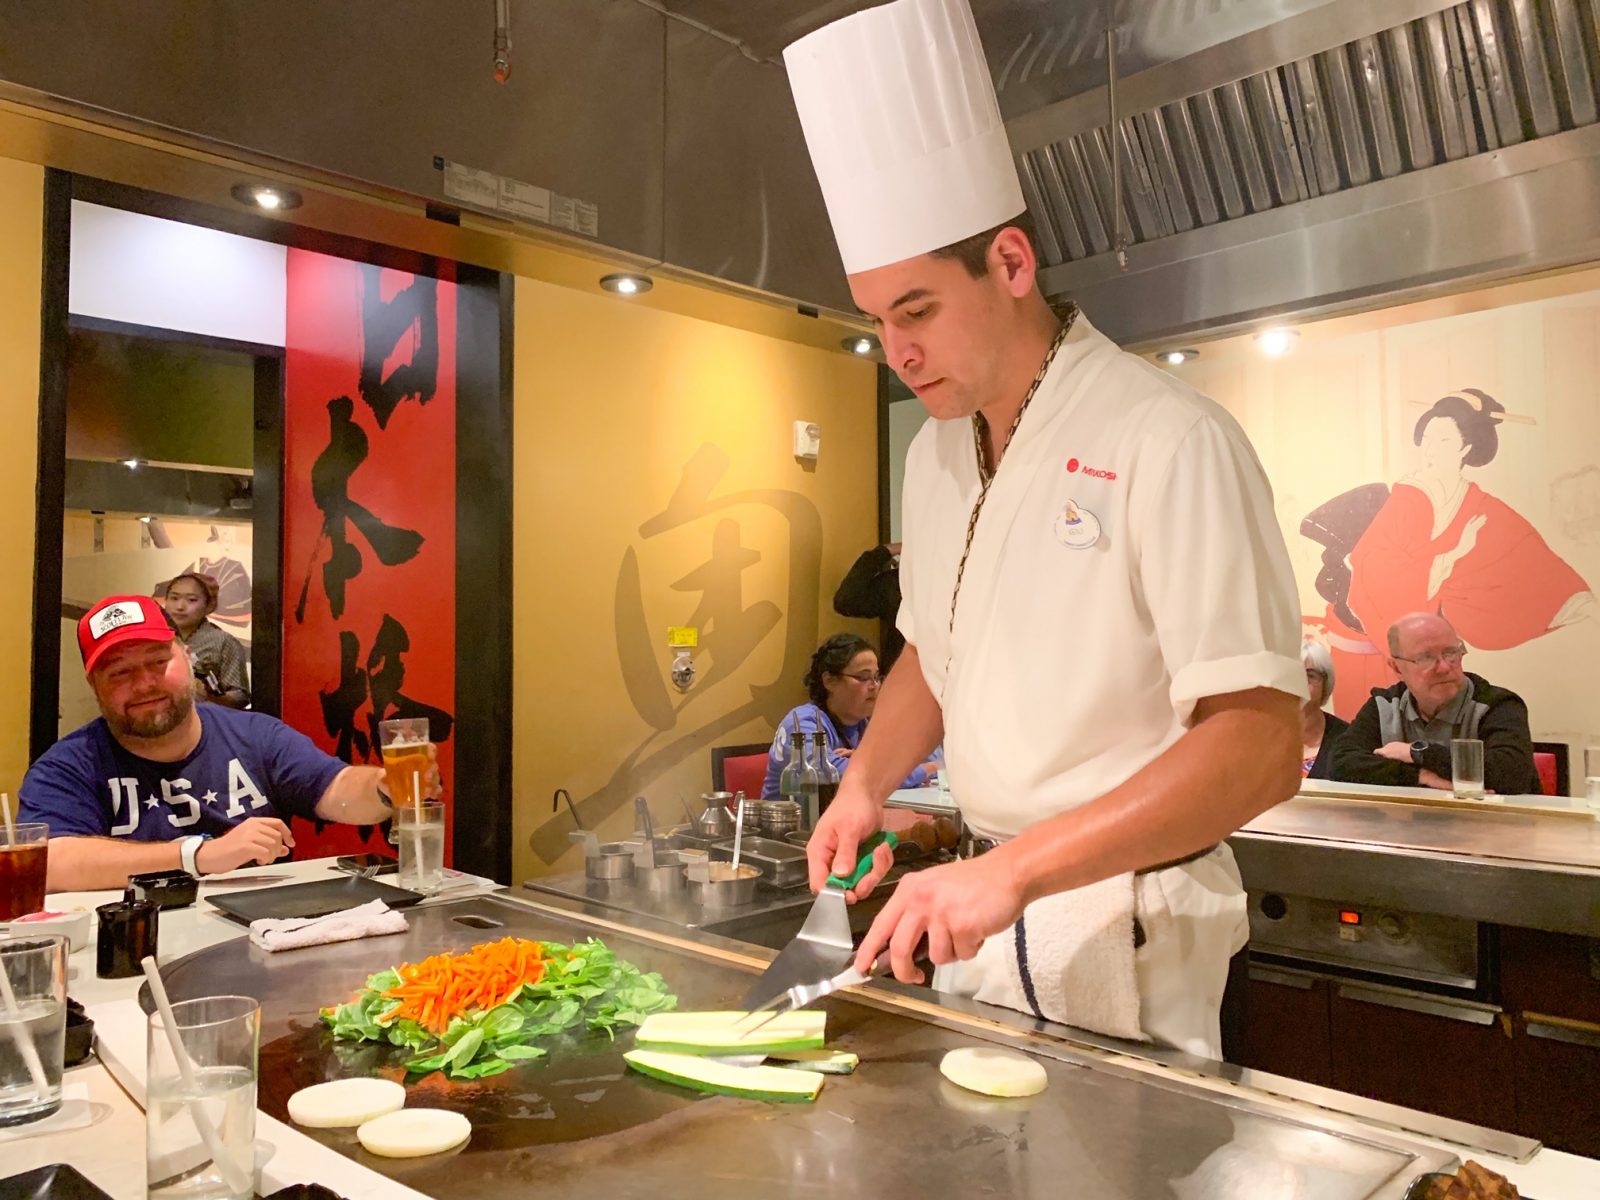 chef cooking vegetables on flat top with people watching at Disney dining plan restaurant 